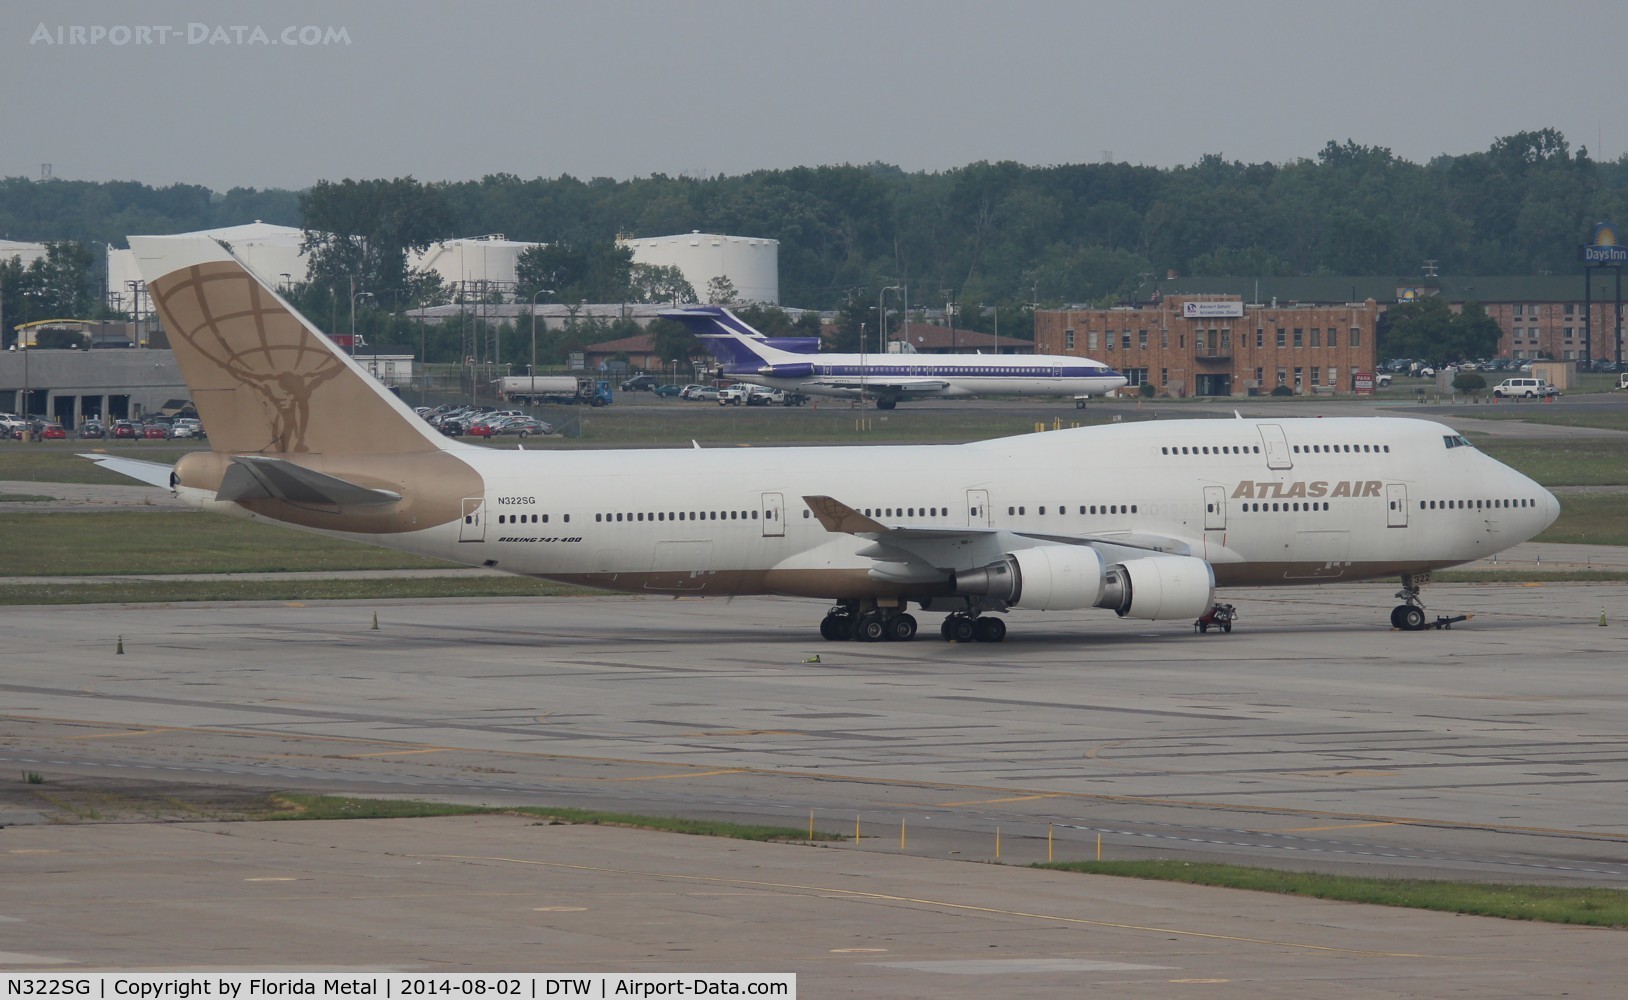 N322SG, 2000 Boeing 747-481 C/N 30322, Atlas Air Charters 747-400 brought in Manchester United soccer team